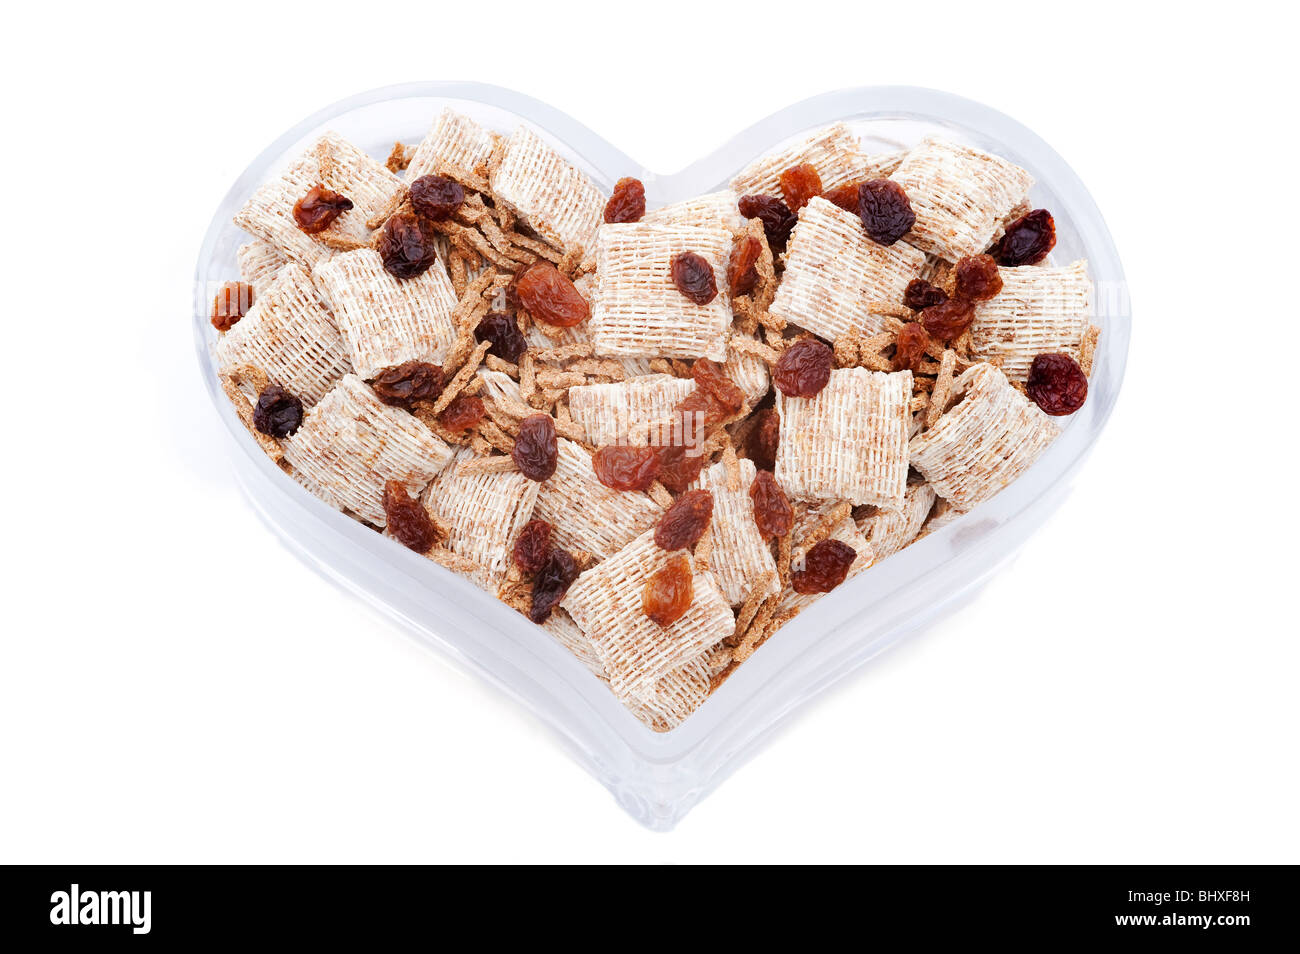 Heart shaped bowl with healthy cereals Stock Photo